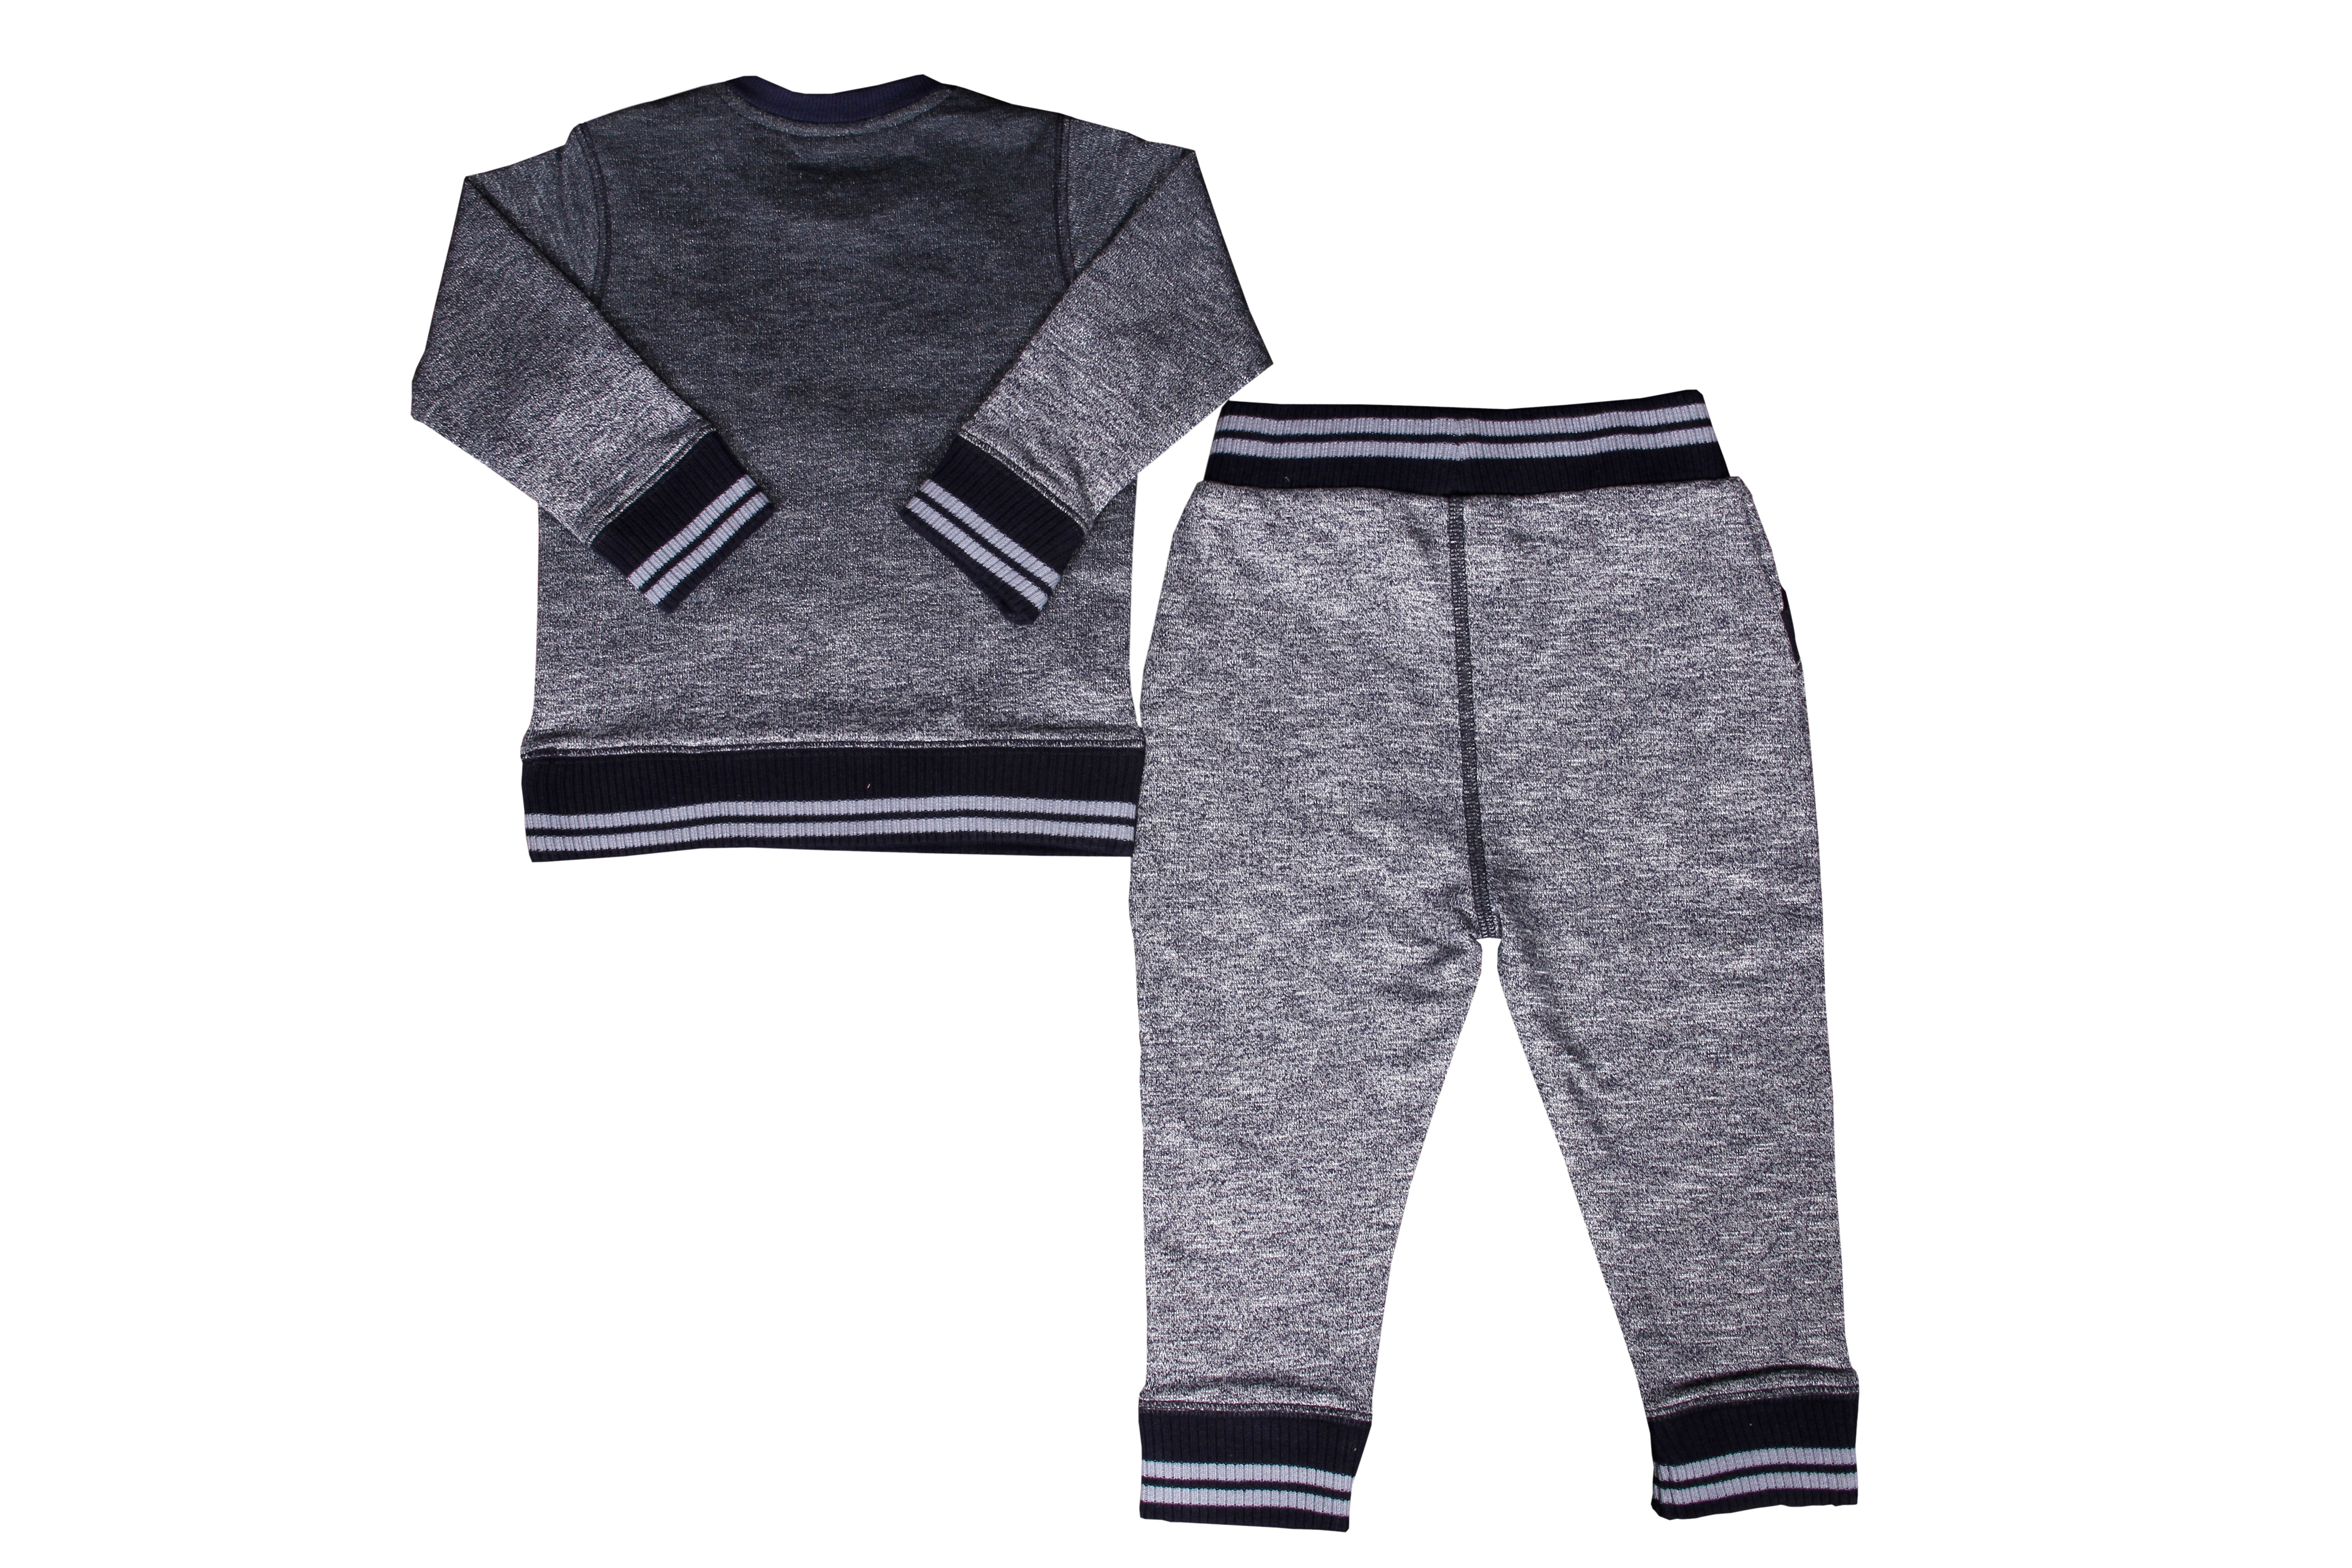 Chase 2 Piece Baby Set